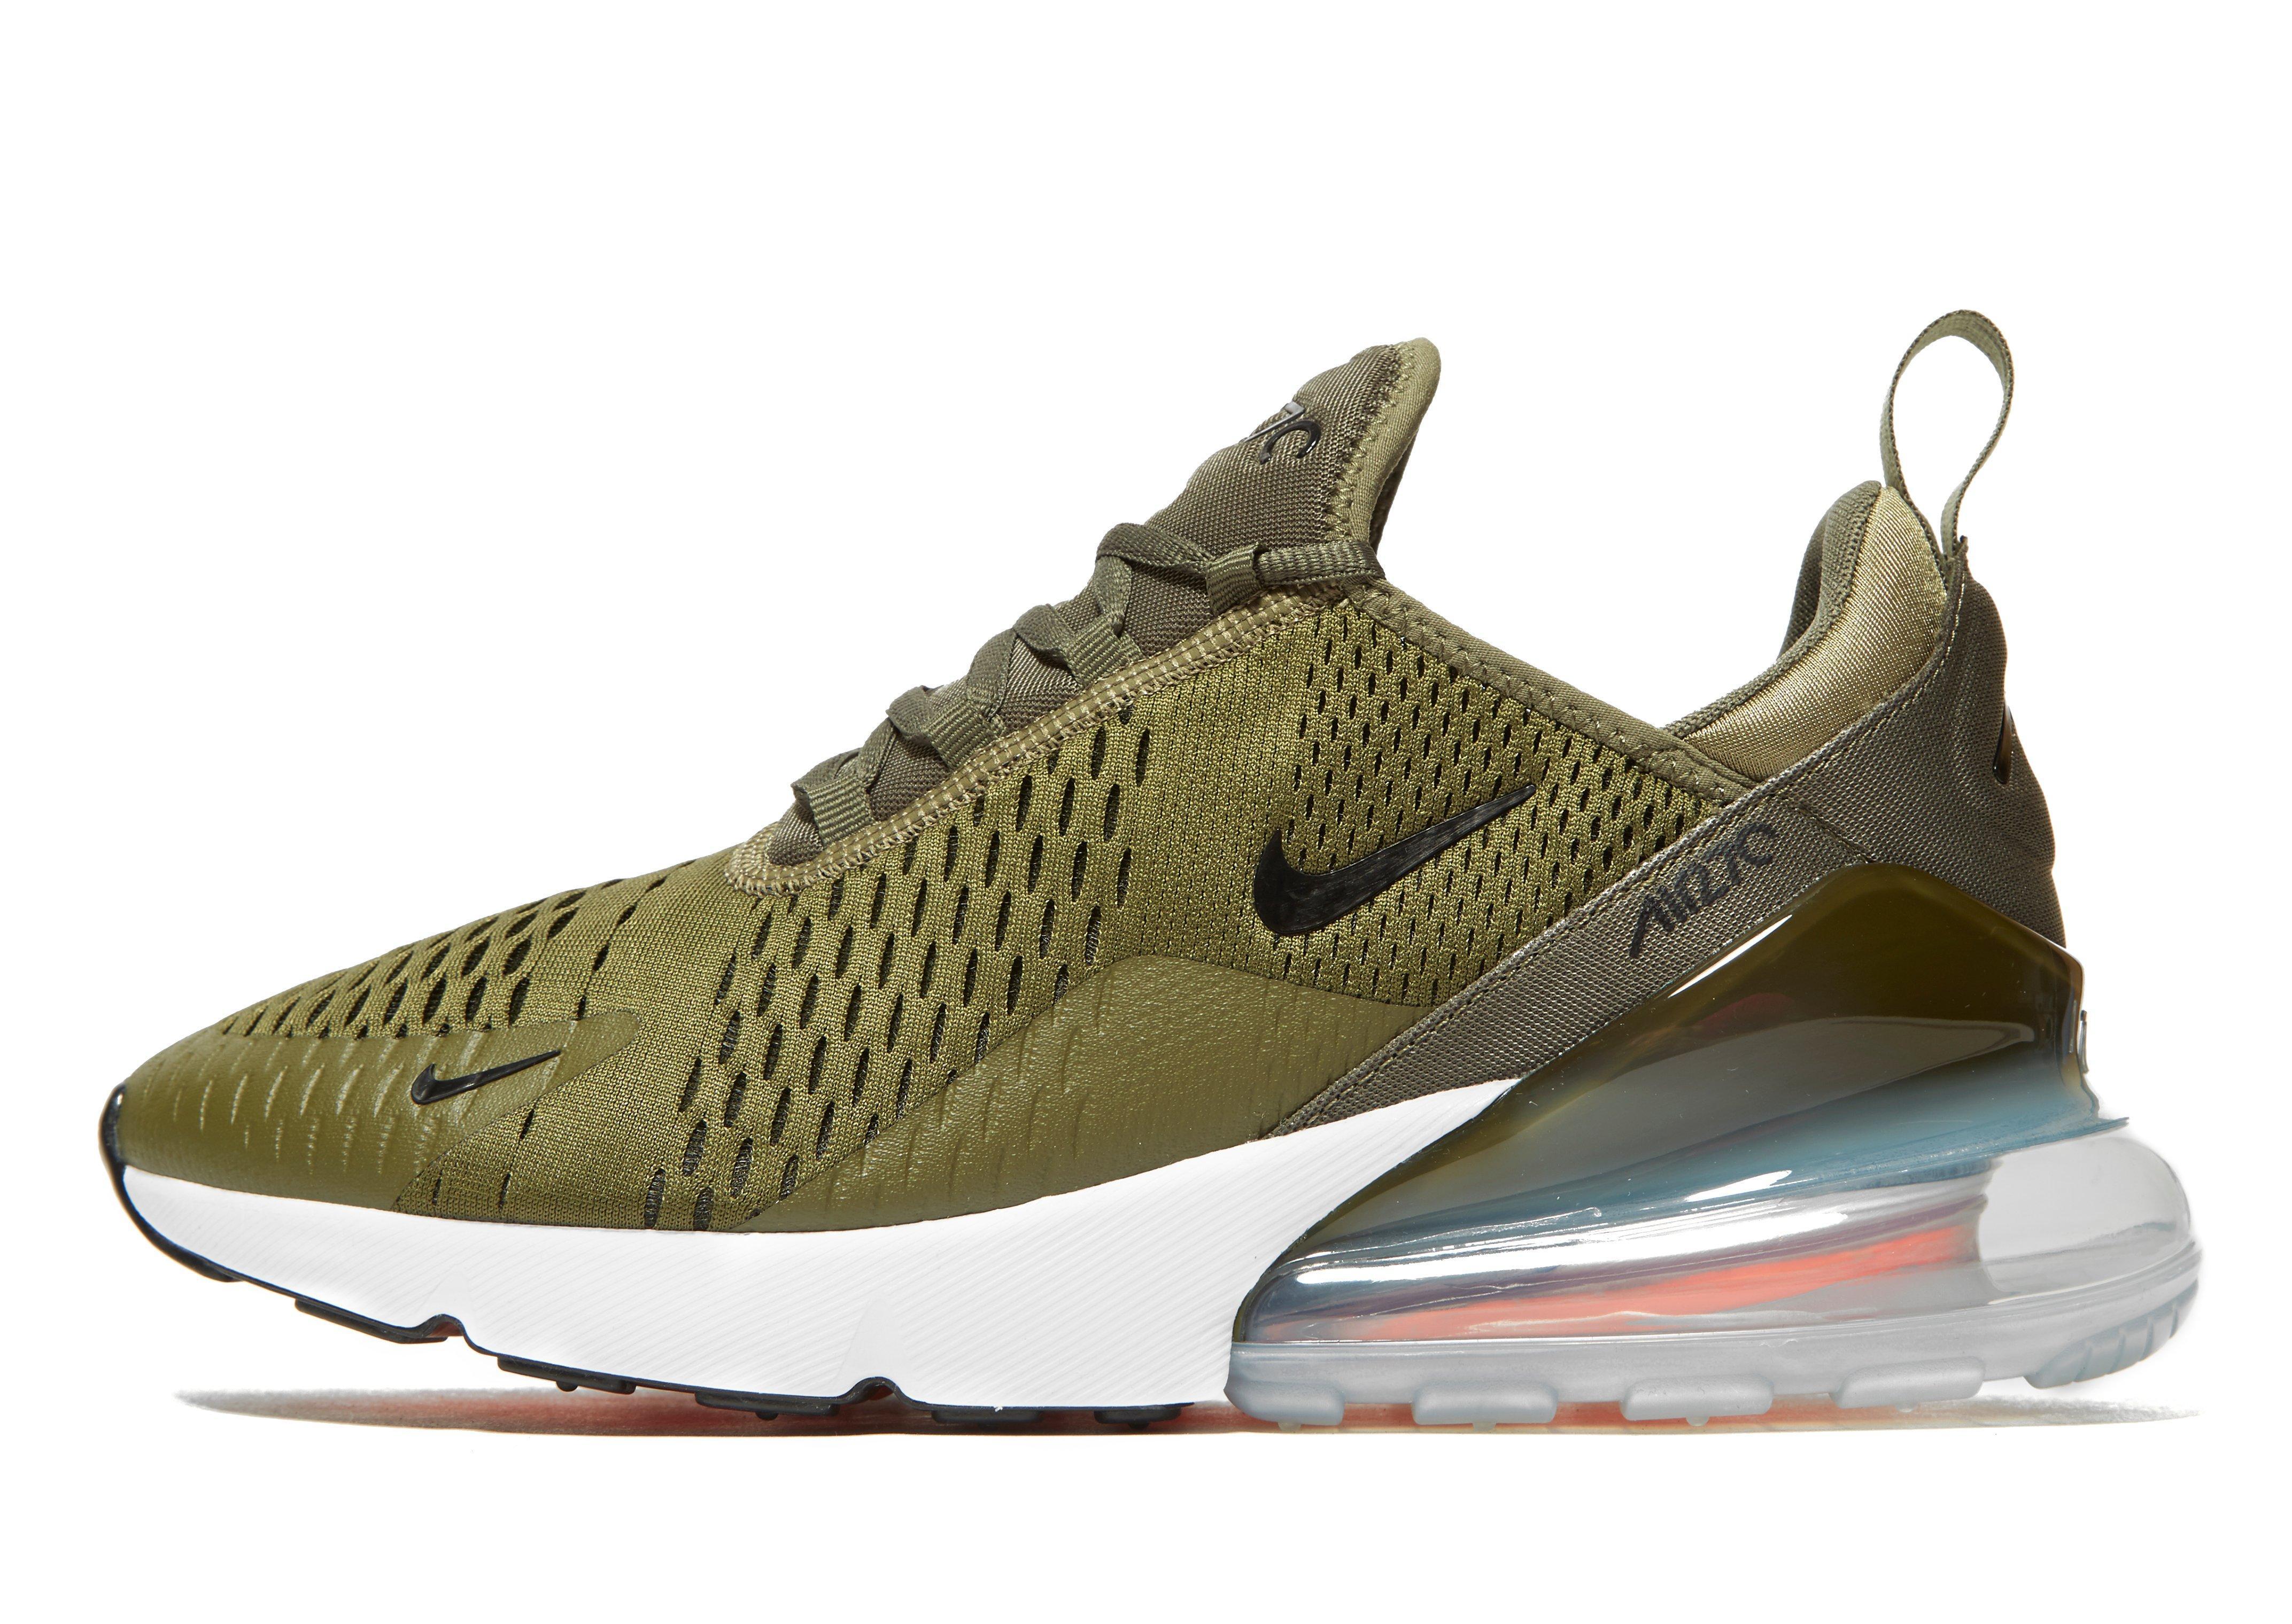 Lyst - Nike Air Max 270 in Green for Men